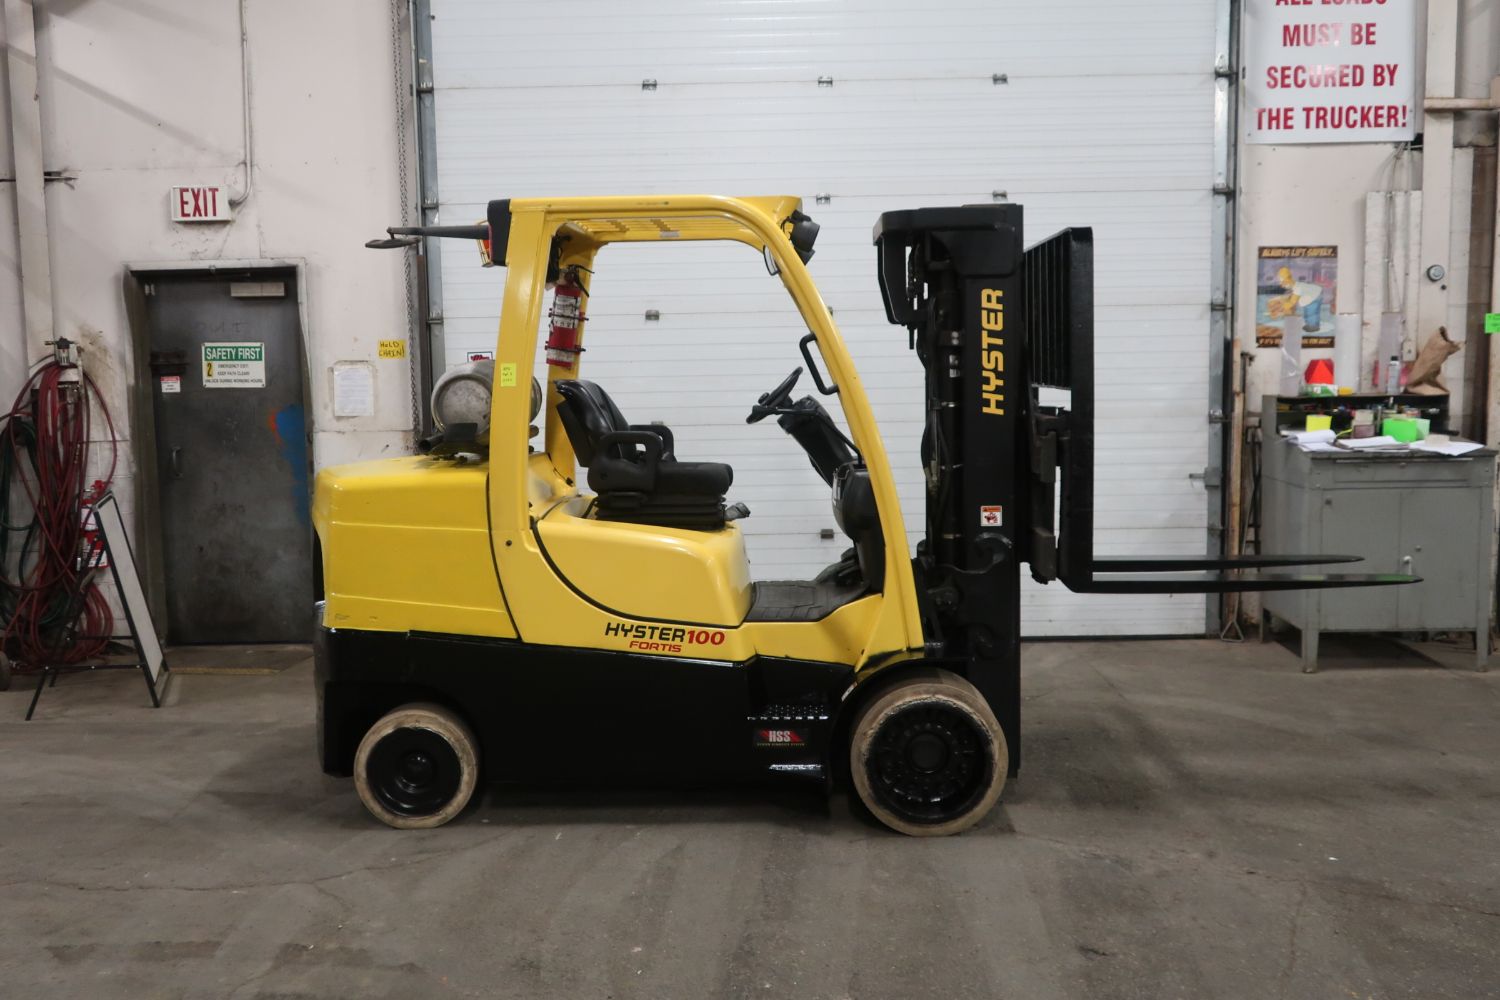 Auction of Forklifts & Aerial Equipment New as 2018 - Genie, Hyster, Toyota & More – LEASE RETURN Auction – INDOOR/OUTDOOR up to 30,000lbs